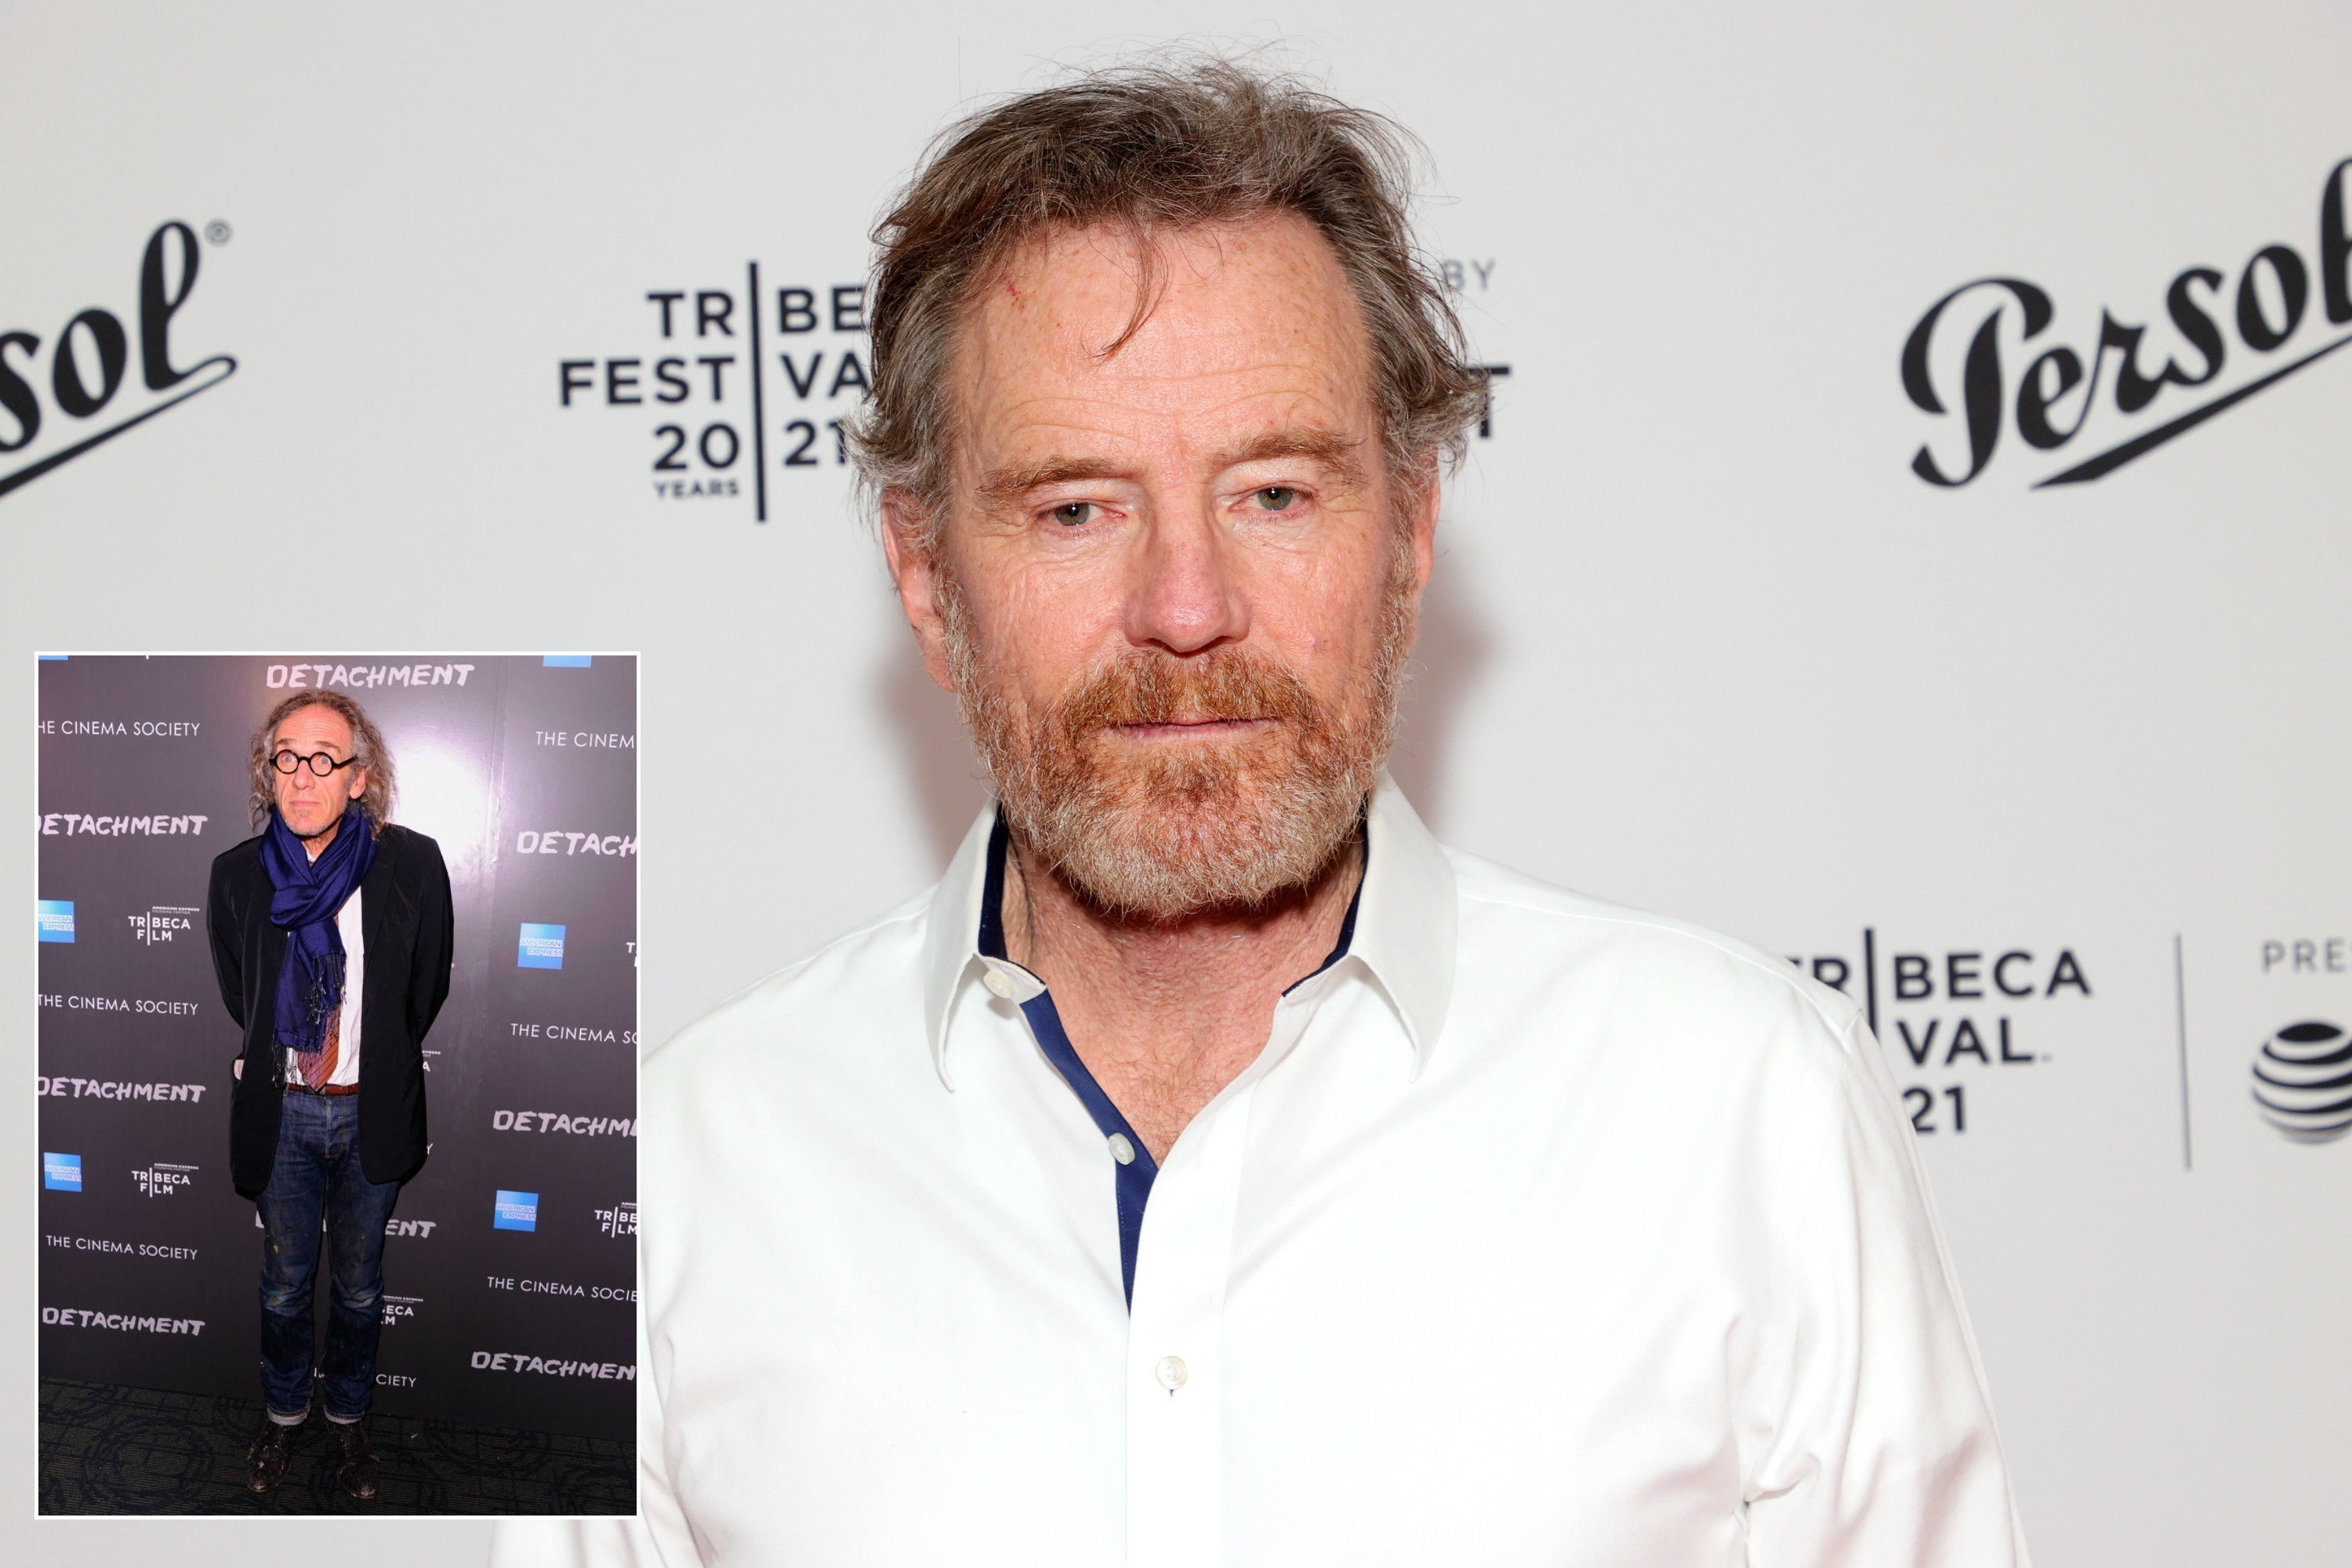 Bryan Cranston attends the Tribeca Festival Awards Night during the 2021 Tribeca Festival at Spring Studios in New York City and the other image shows director Tony Kaye at the premiere of Tribeca Film&#x27;s &quot;Detachment&quot; on March 13, 2012 in New York City